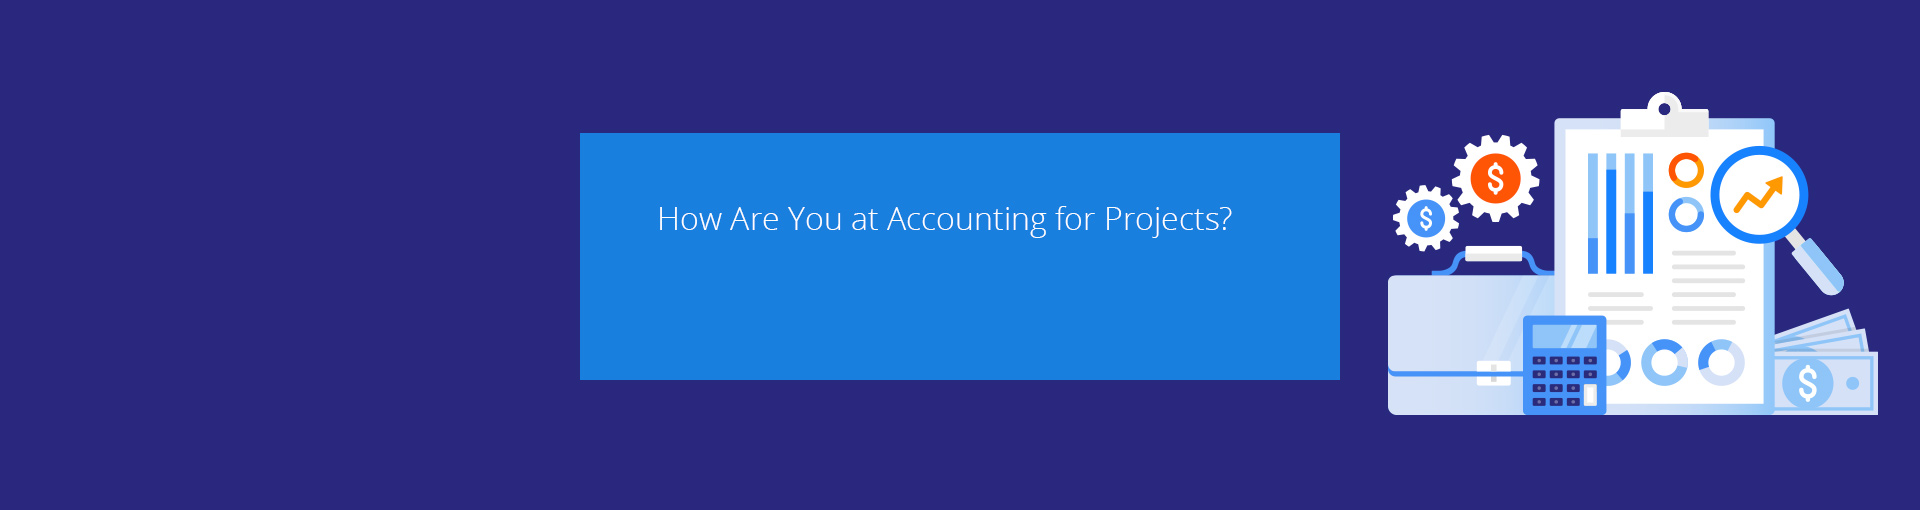 How Are You at Accounting for Projects? Featured Image